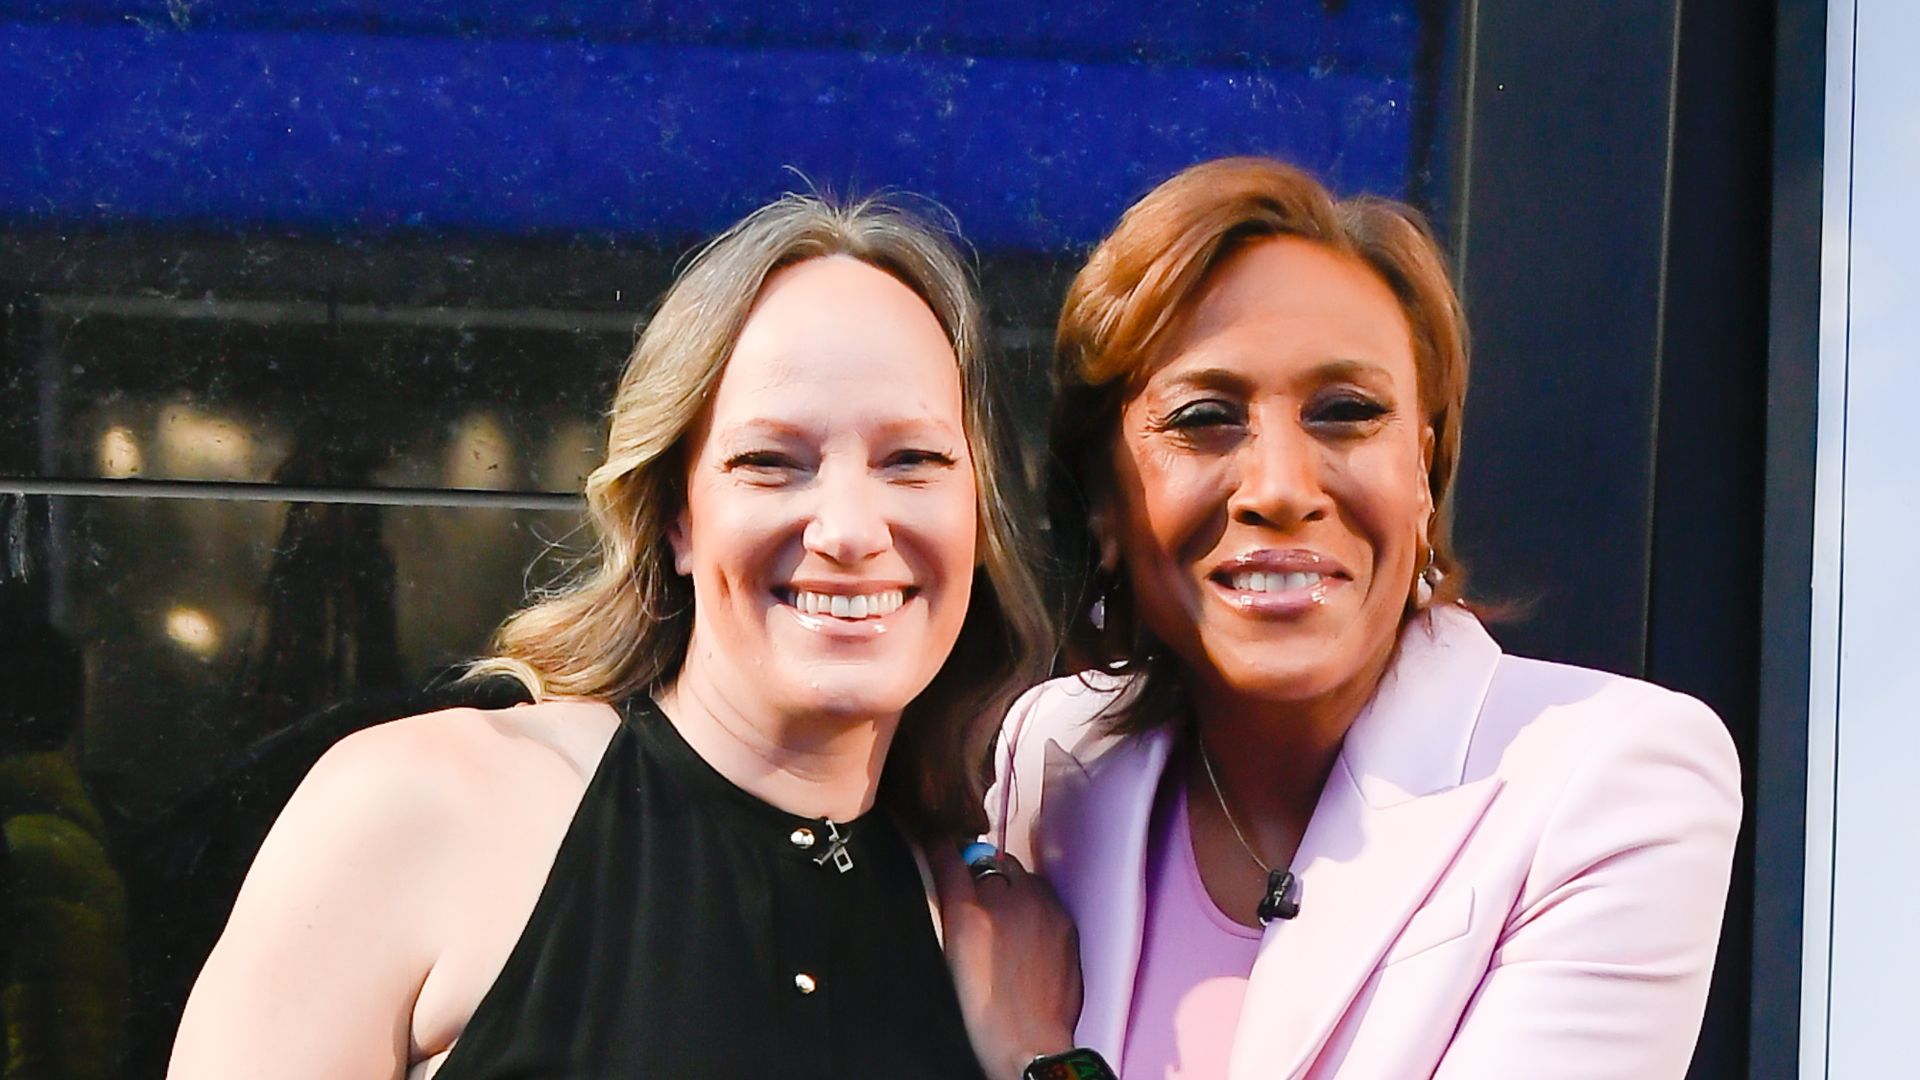 Amber Laign and Robin Roberts celebrate Robin Roberts' 20th "GMA" anniversary outside "Good Morning America" on April 14, 2022 in New York City